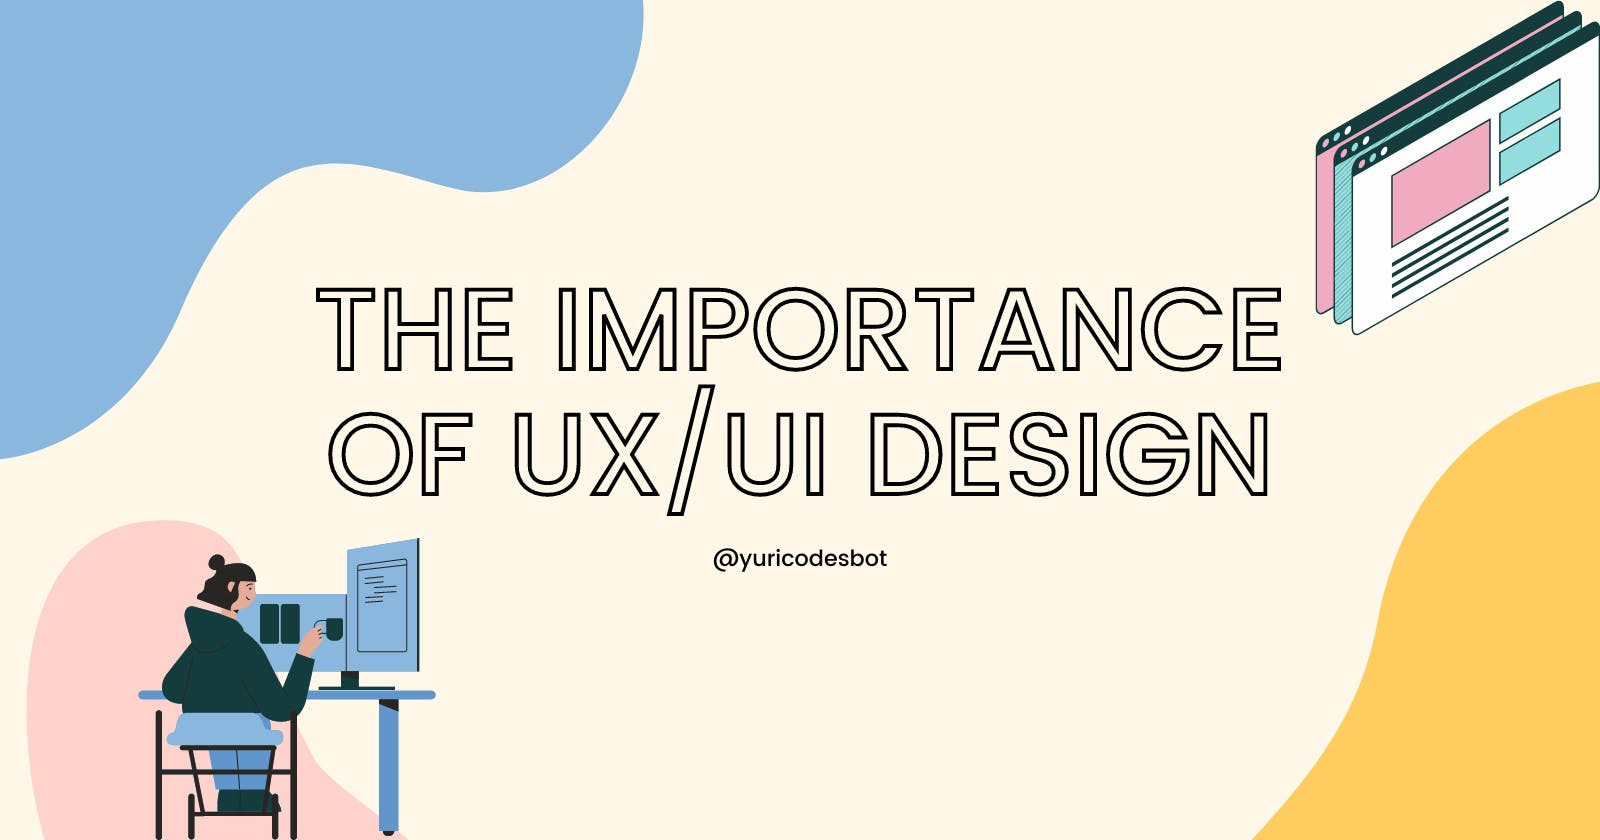 Why does UX/UI even matter?